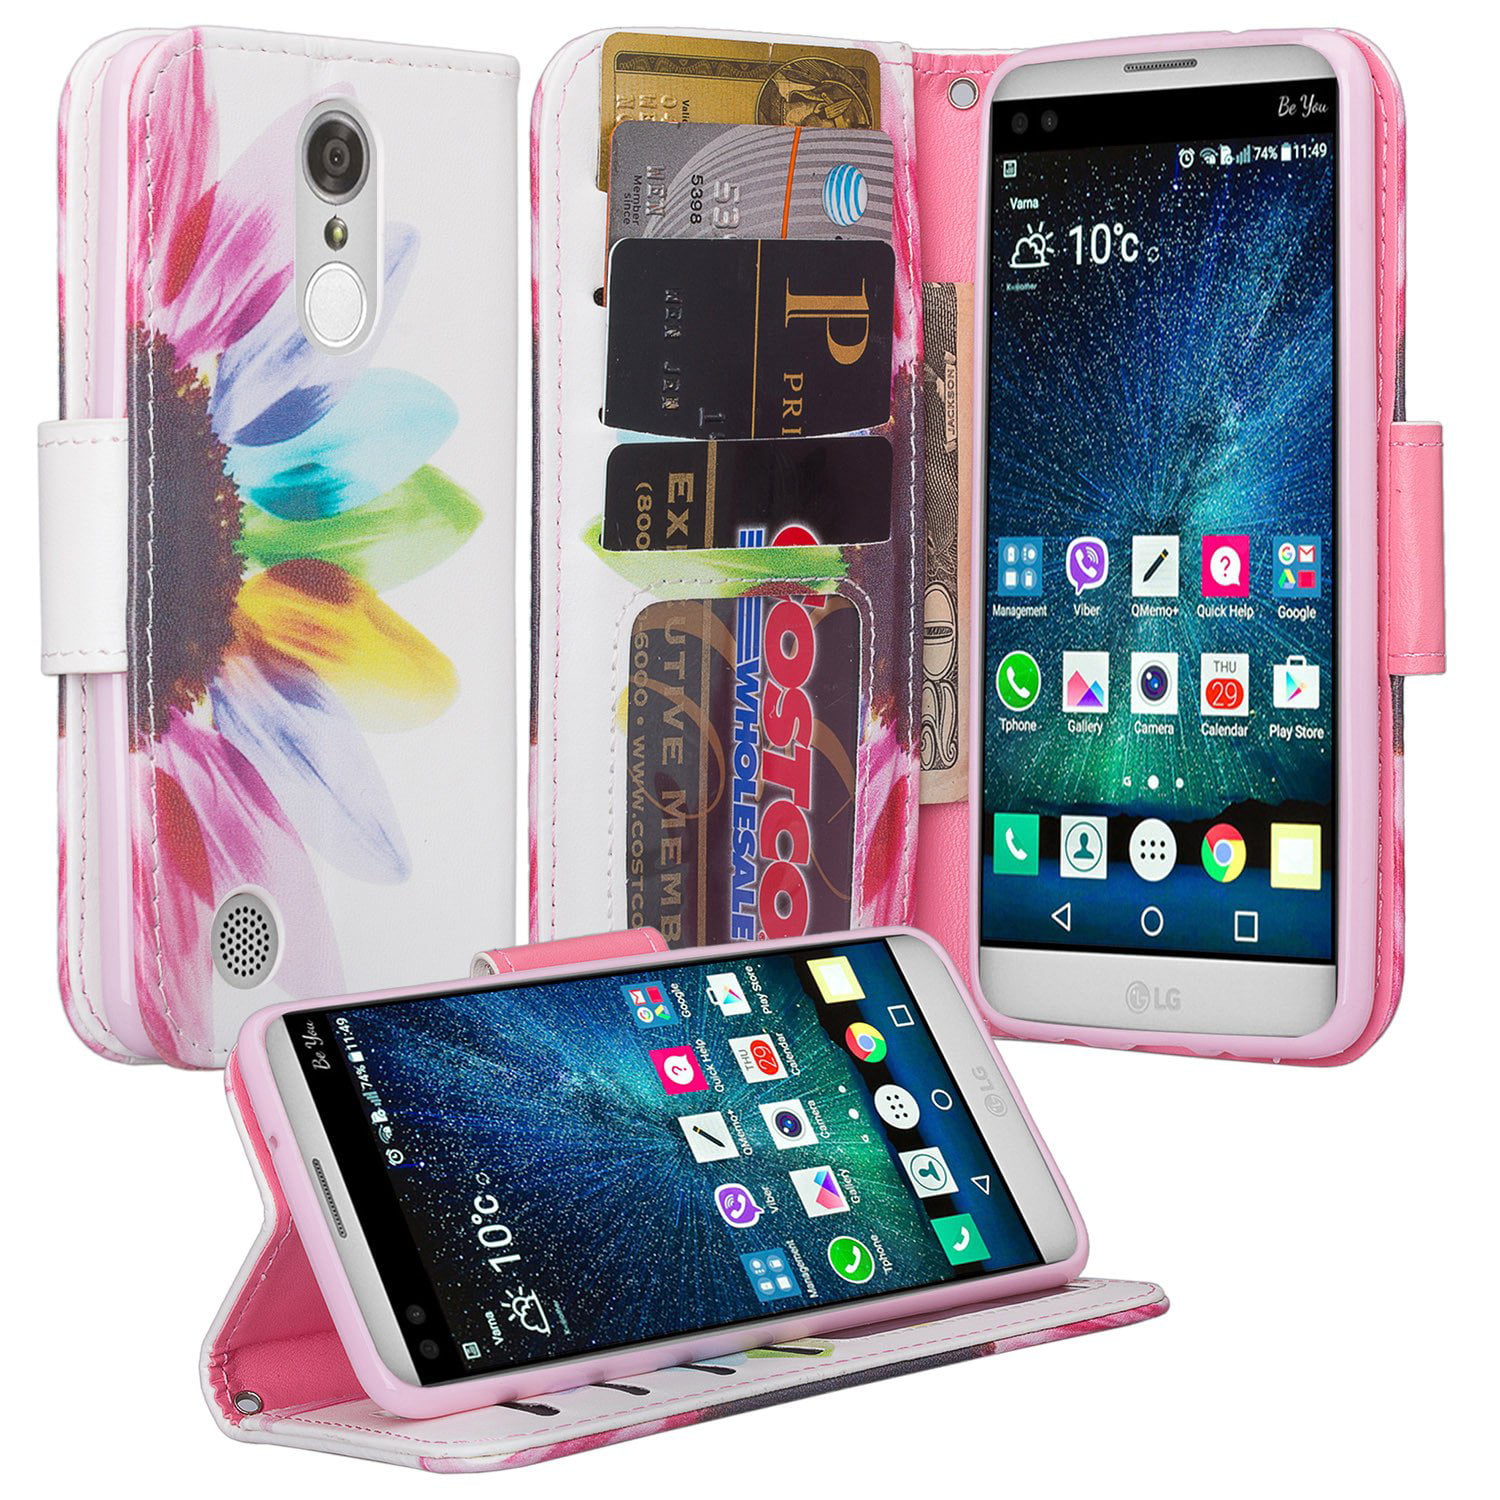 MChoice for LG Fortune/Phoenix 3/Rebel 2/K4 2017 Wallet Flip Case Cover with Card Slots and Stand 